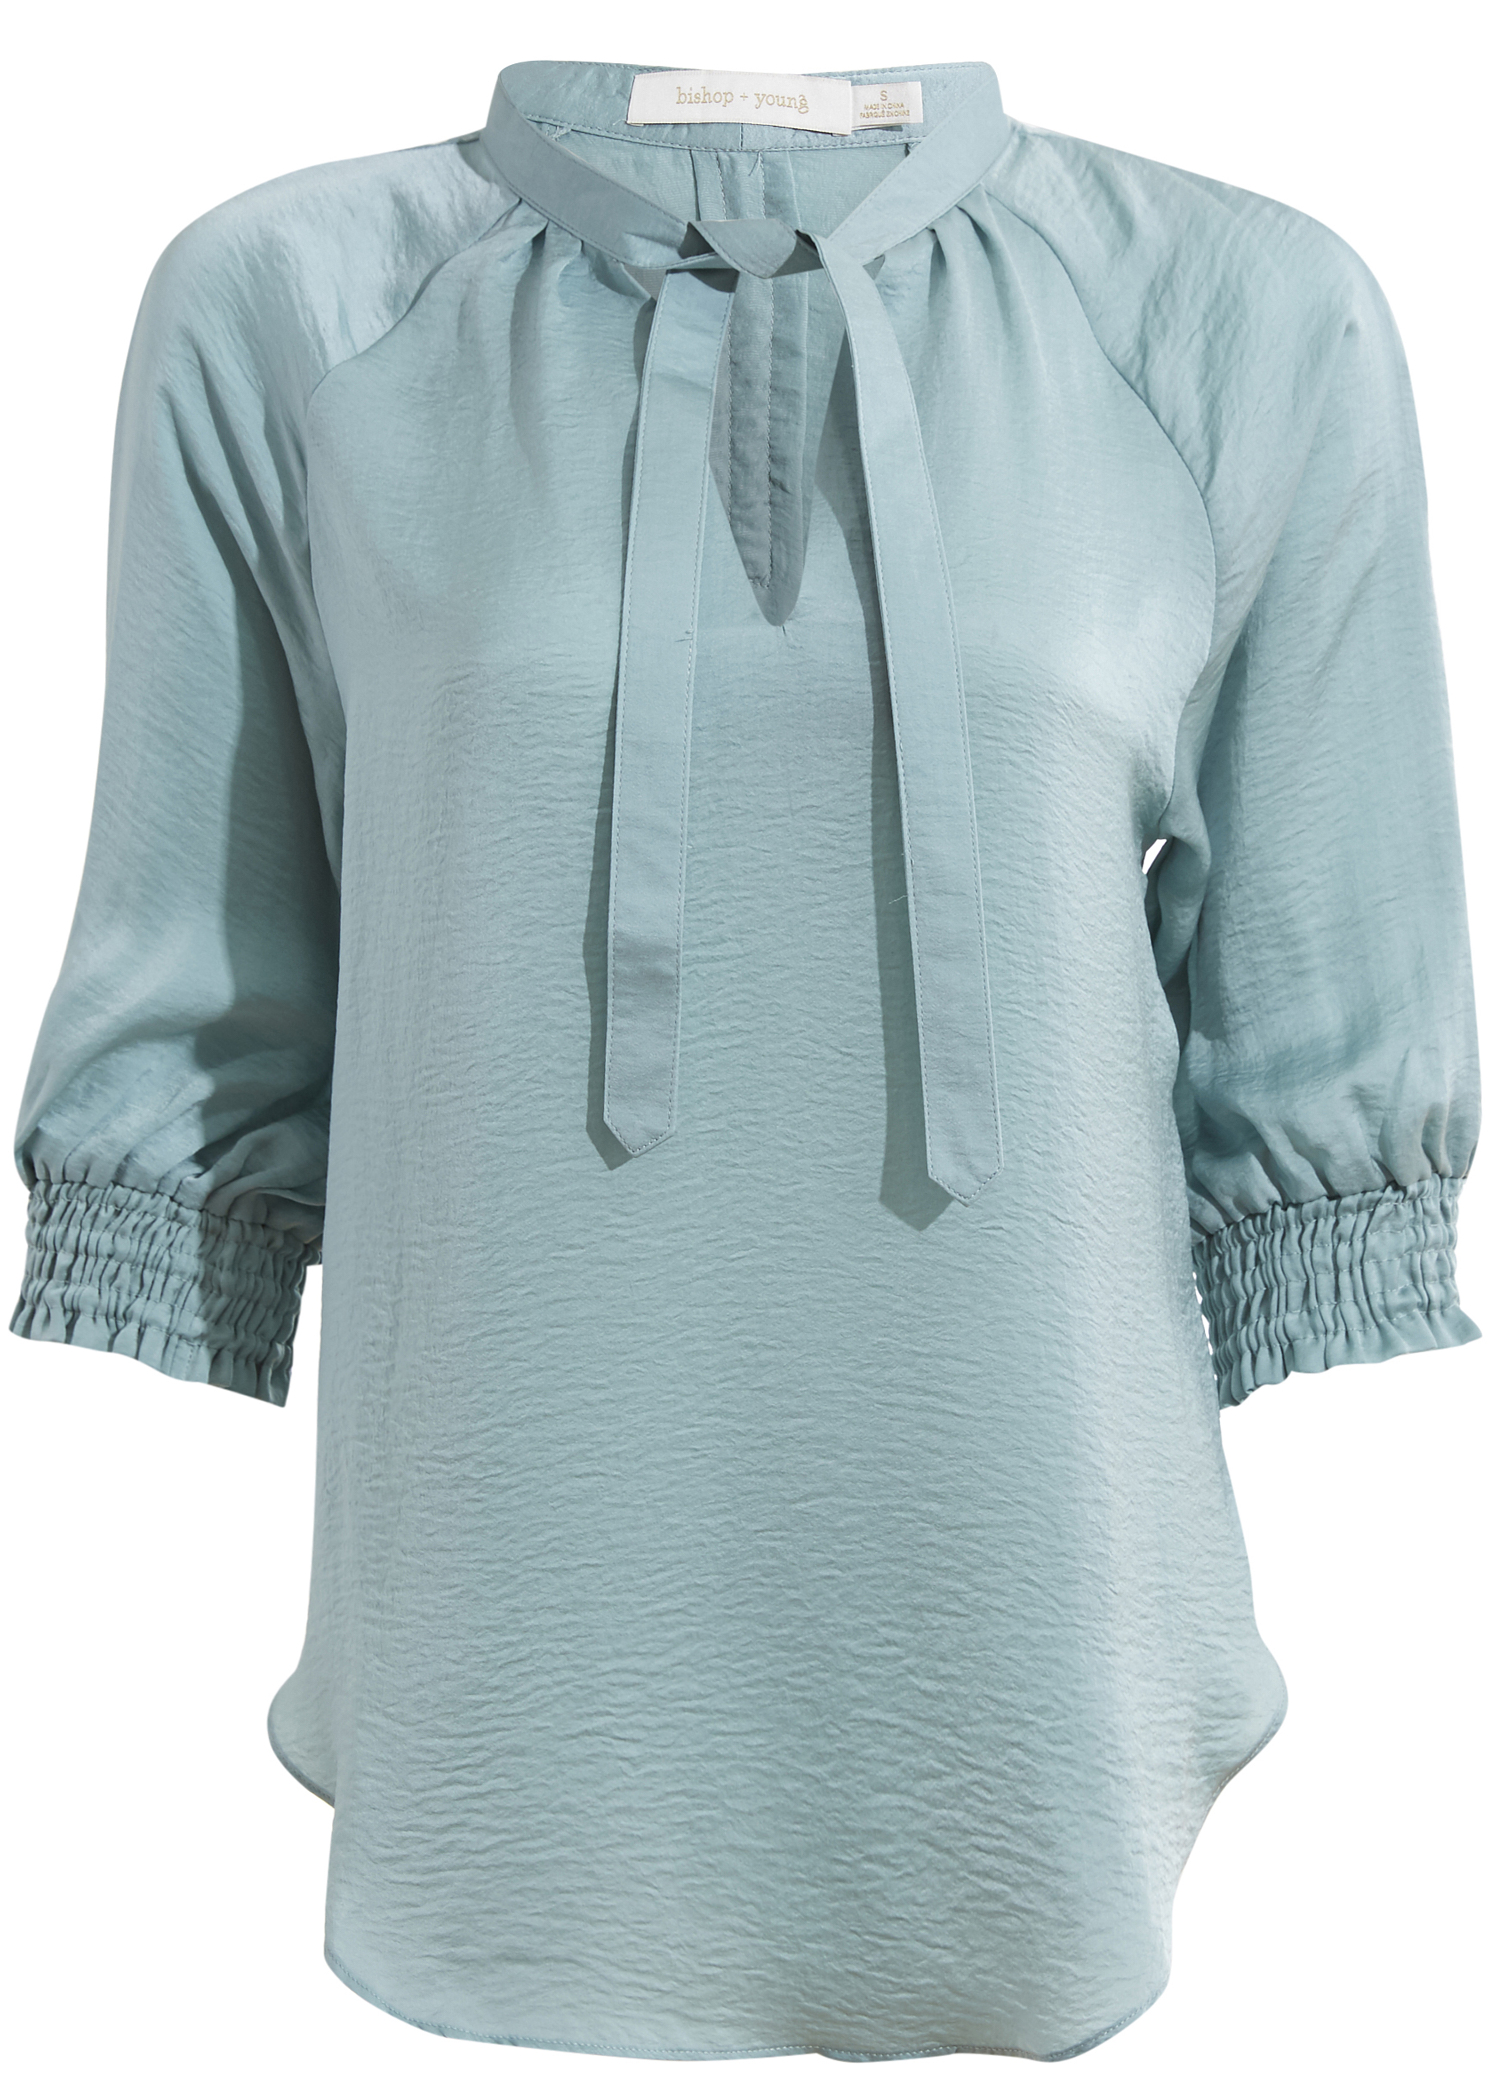 Bishop+Young Three Quarter Sleeve Blouse